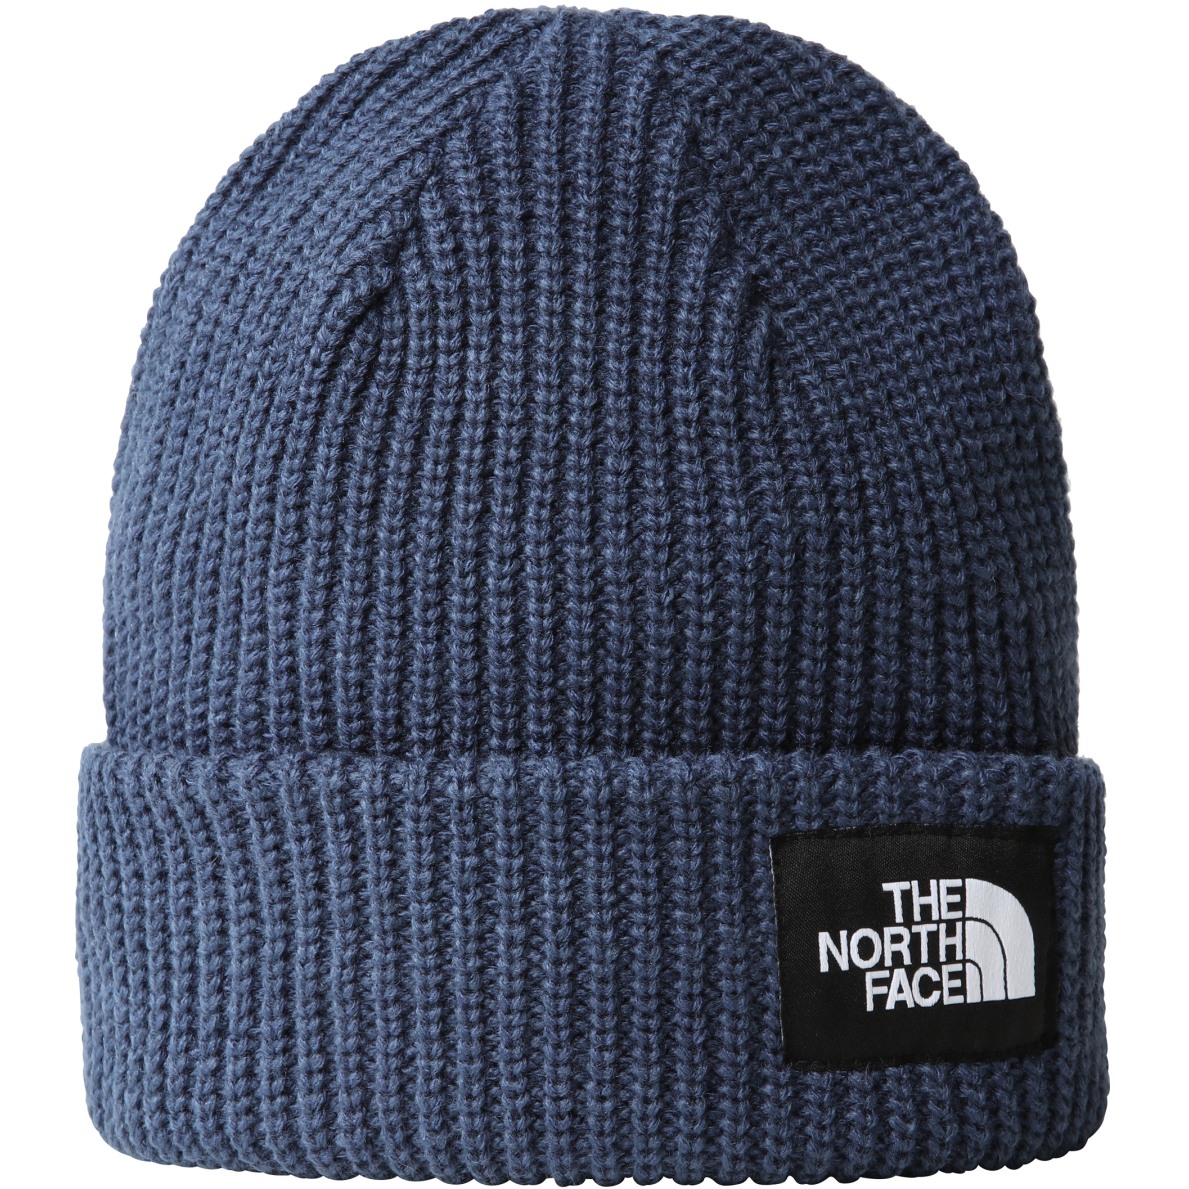 Picture of The North Face Salty Dog Beanie - Shady Blue